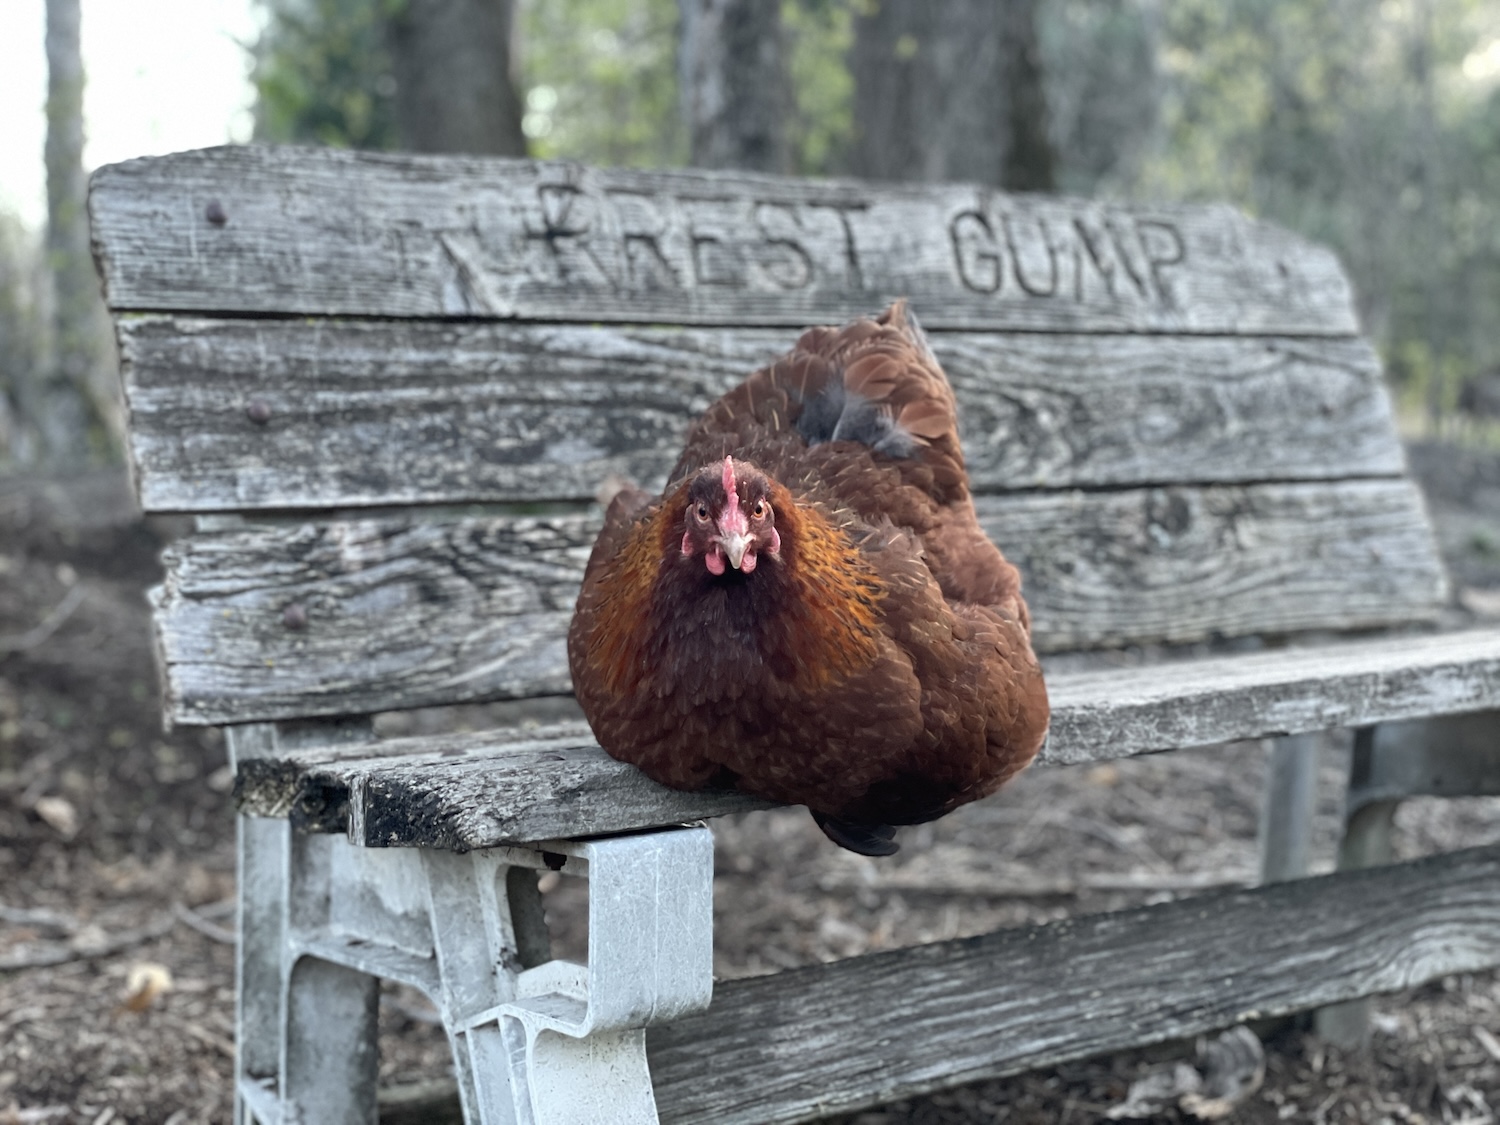 A brown hen sitting on a bench by herself